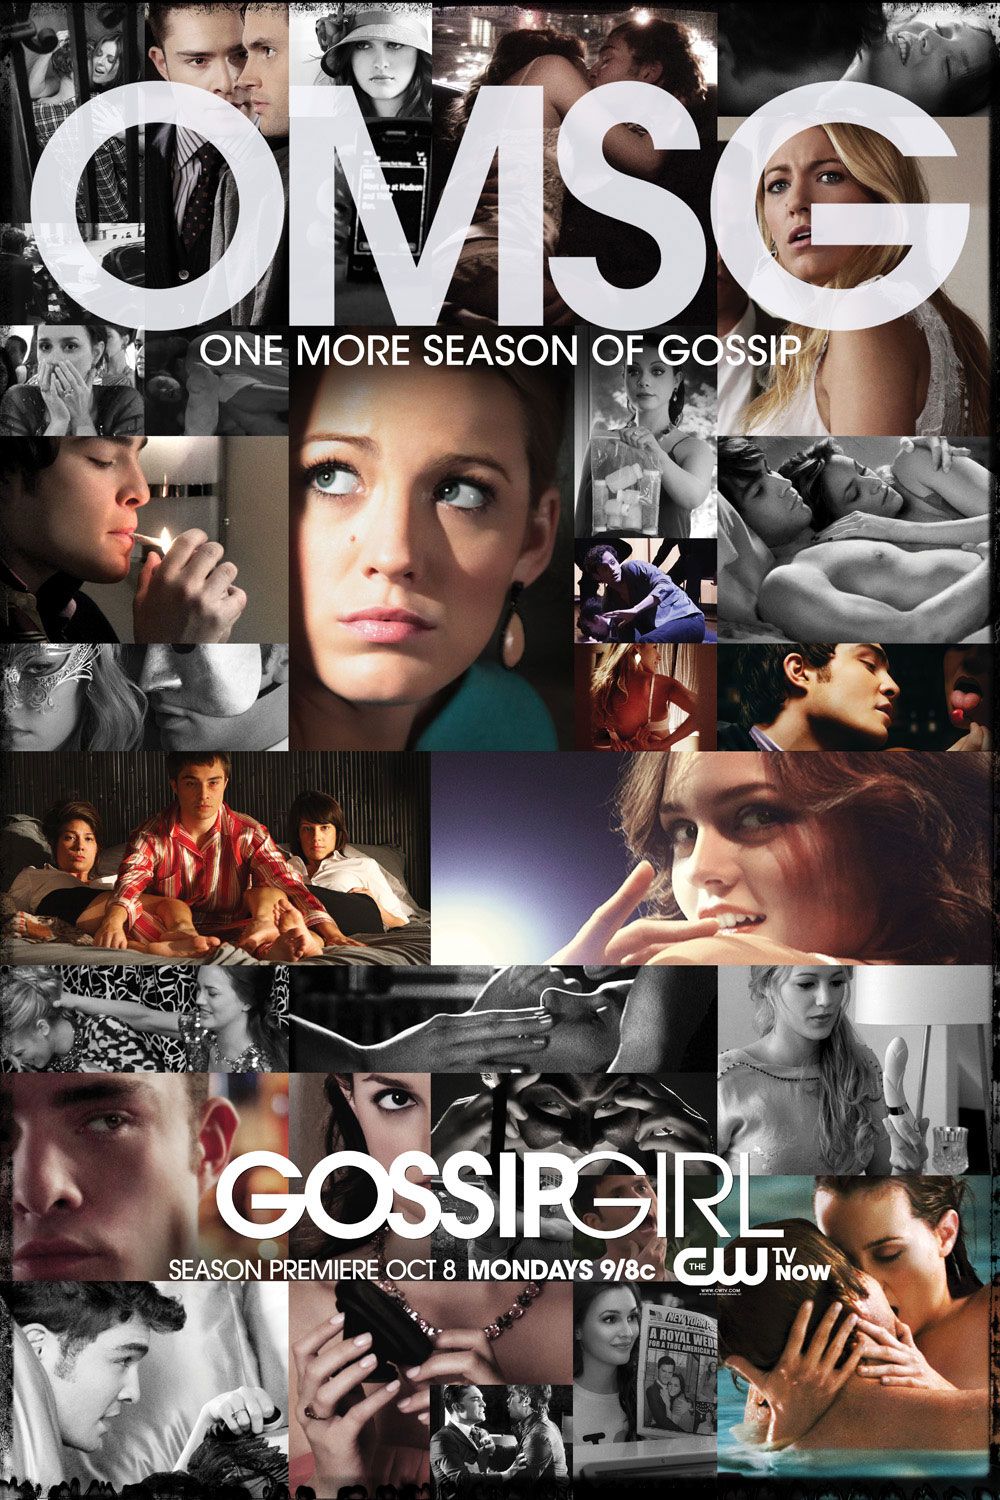 Gossip Girl Posters: What They Tell Us About the CW Show